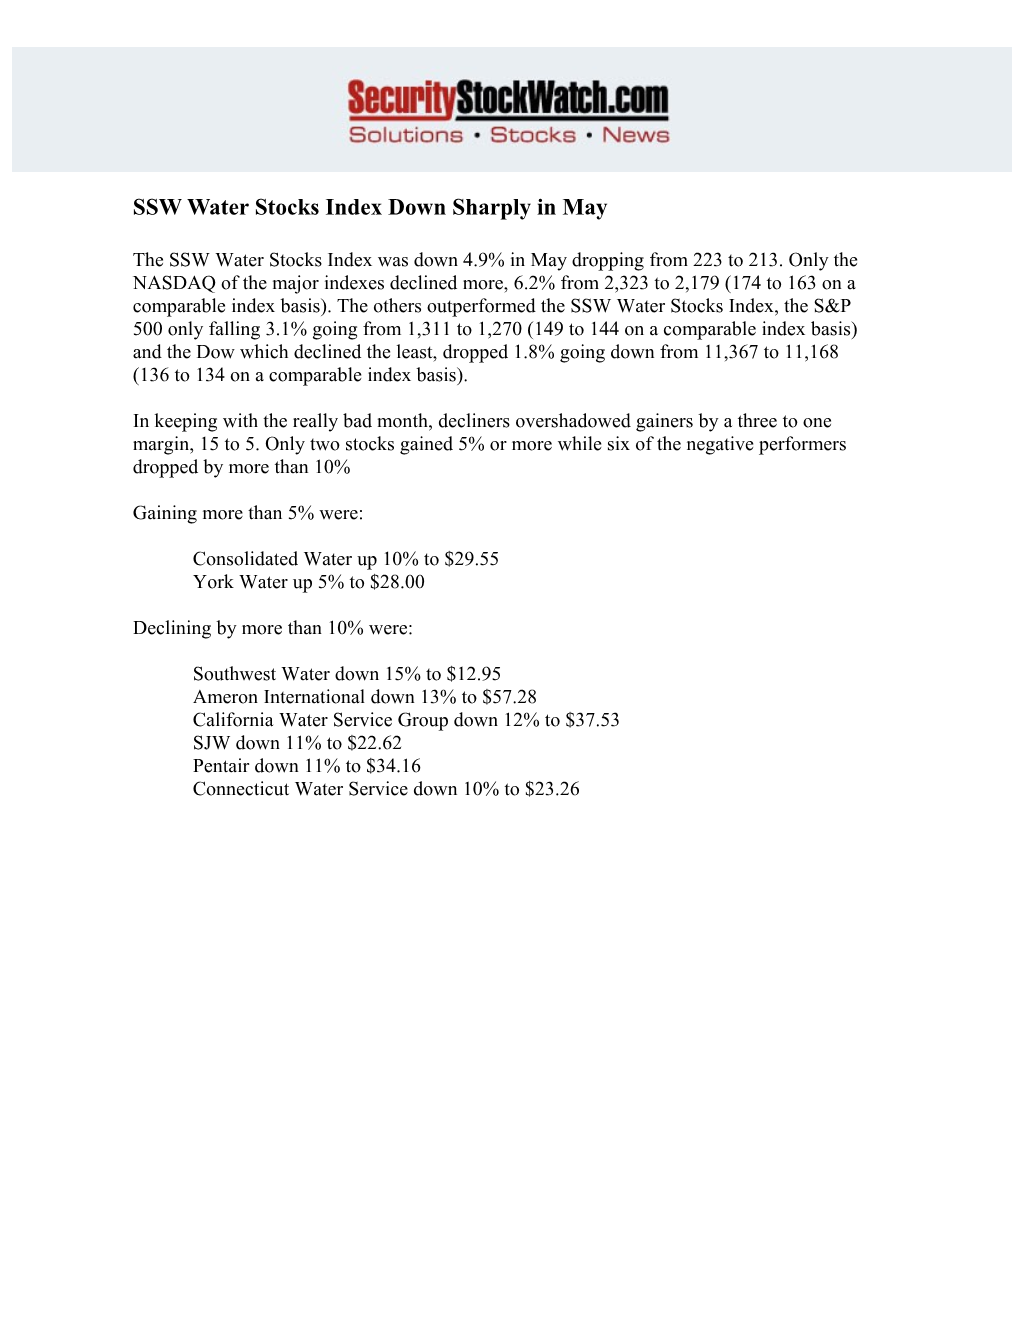 SSW Water Stocks Index Down Sharply in May